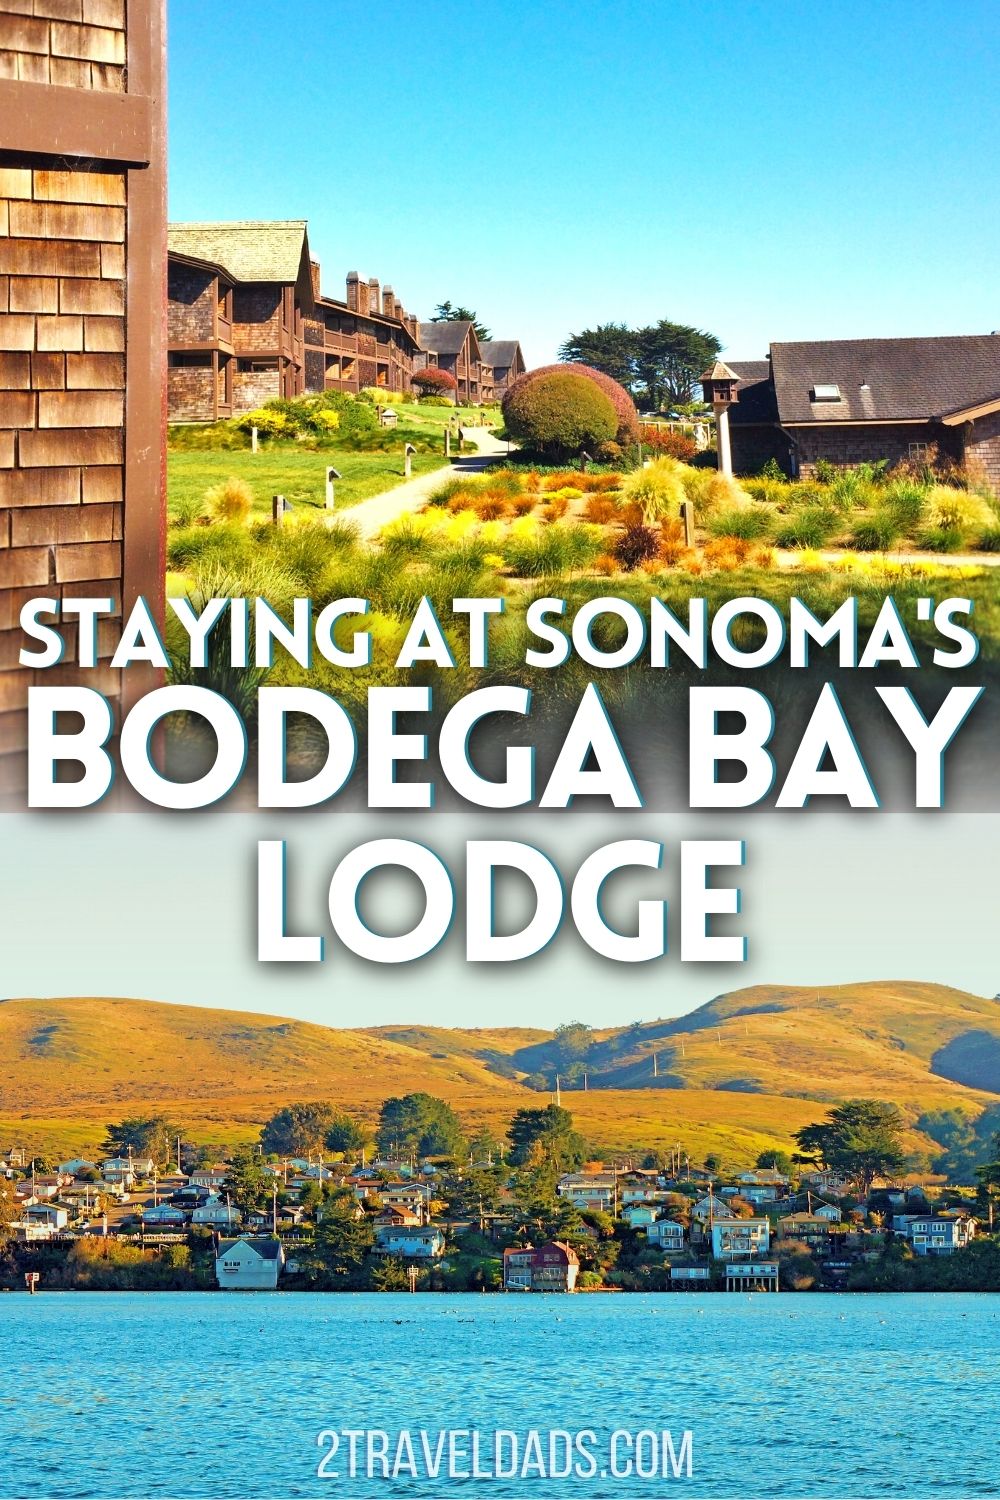 The Bodega Bay Lodge is a beautiful property set just off the beach on the Sonoma Coast of Northern California. Review and ideas for things to do in the Bodega Bay area of Sonoma County.